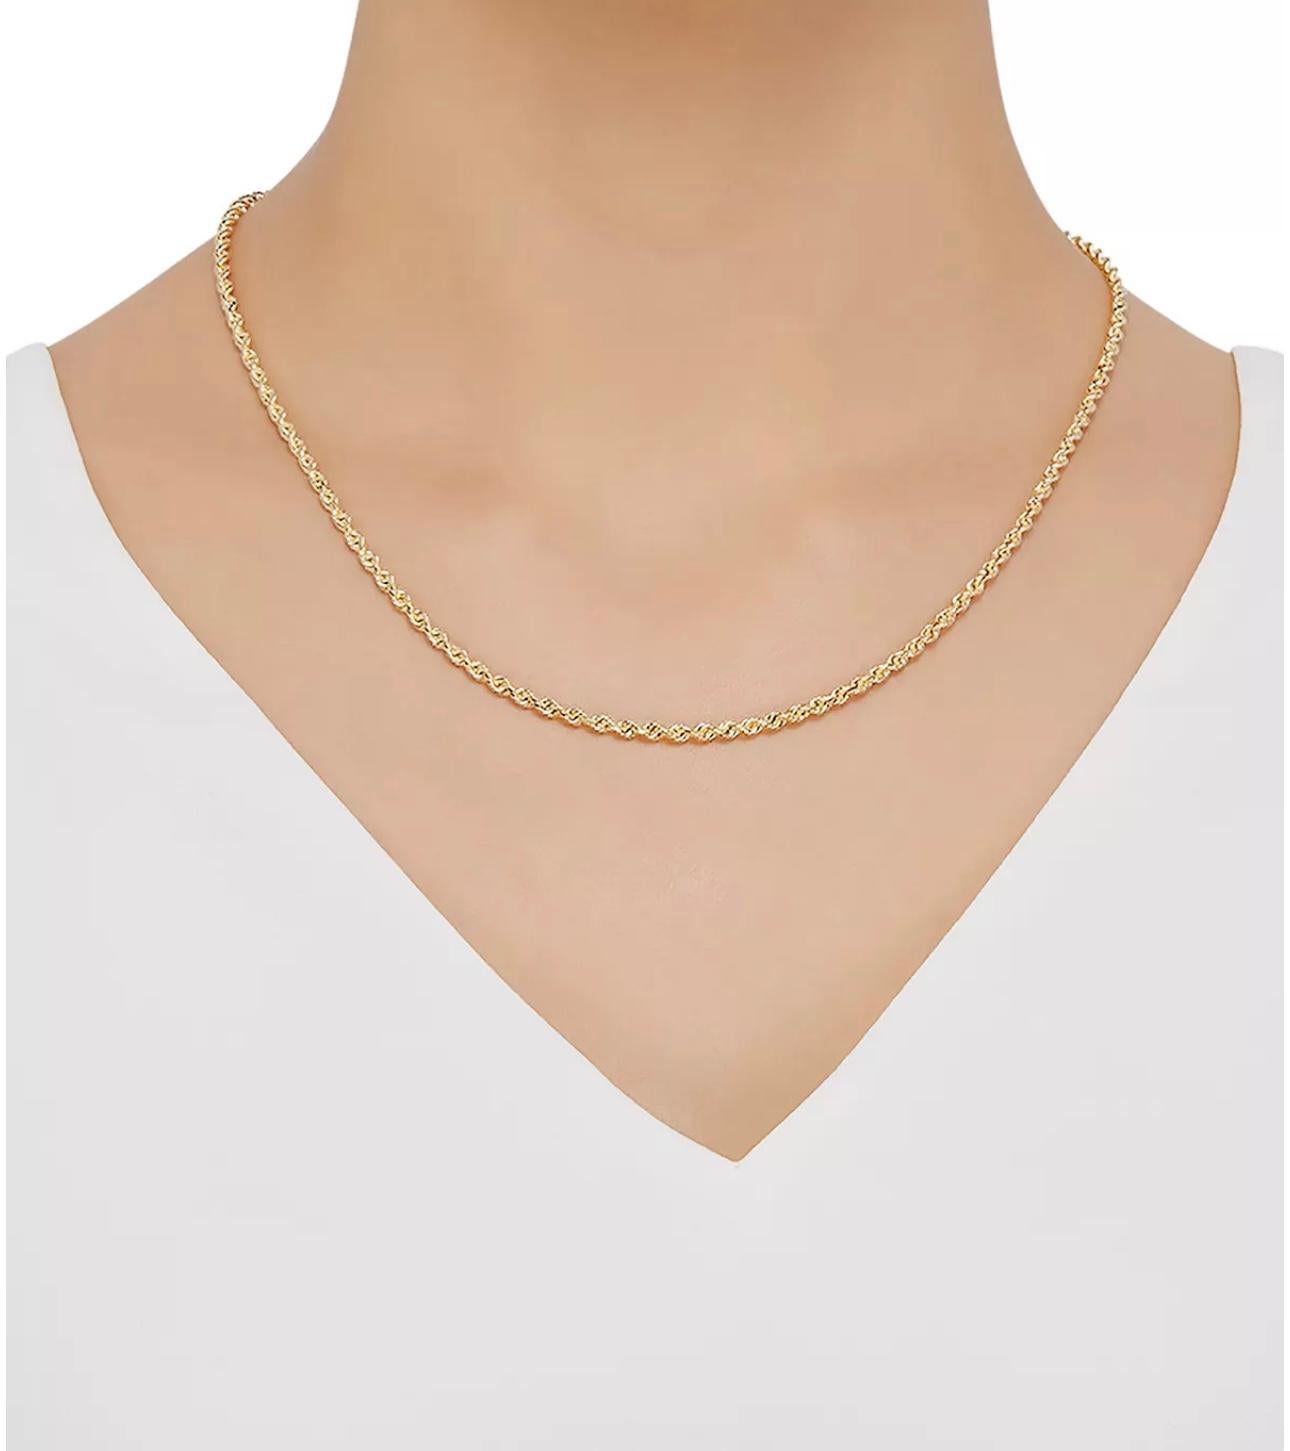 Women's or Men's Vintage 14 Karat Yellow Gold 17 Gm, Rope Chain Necklace